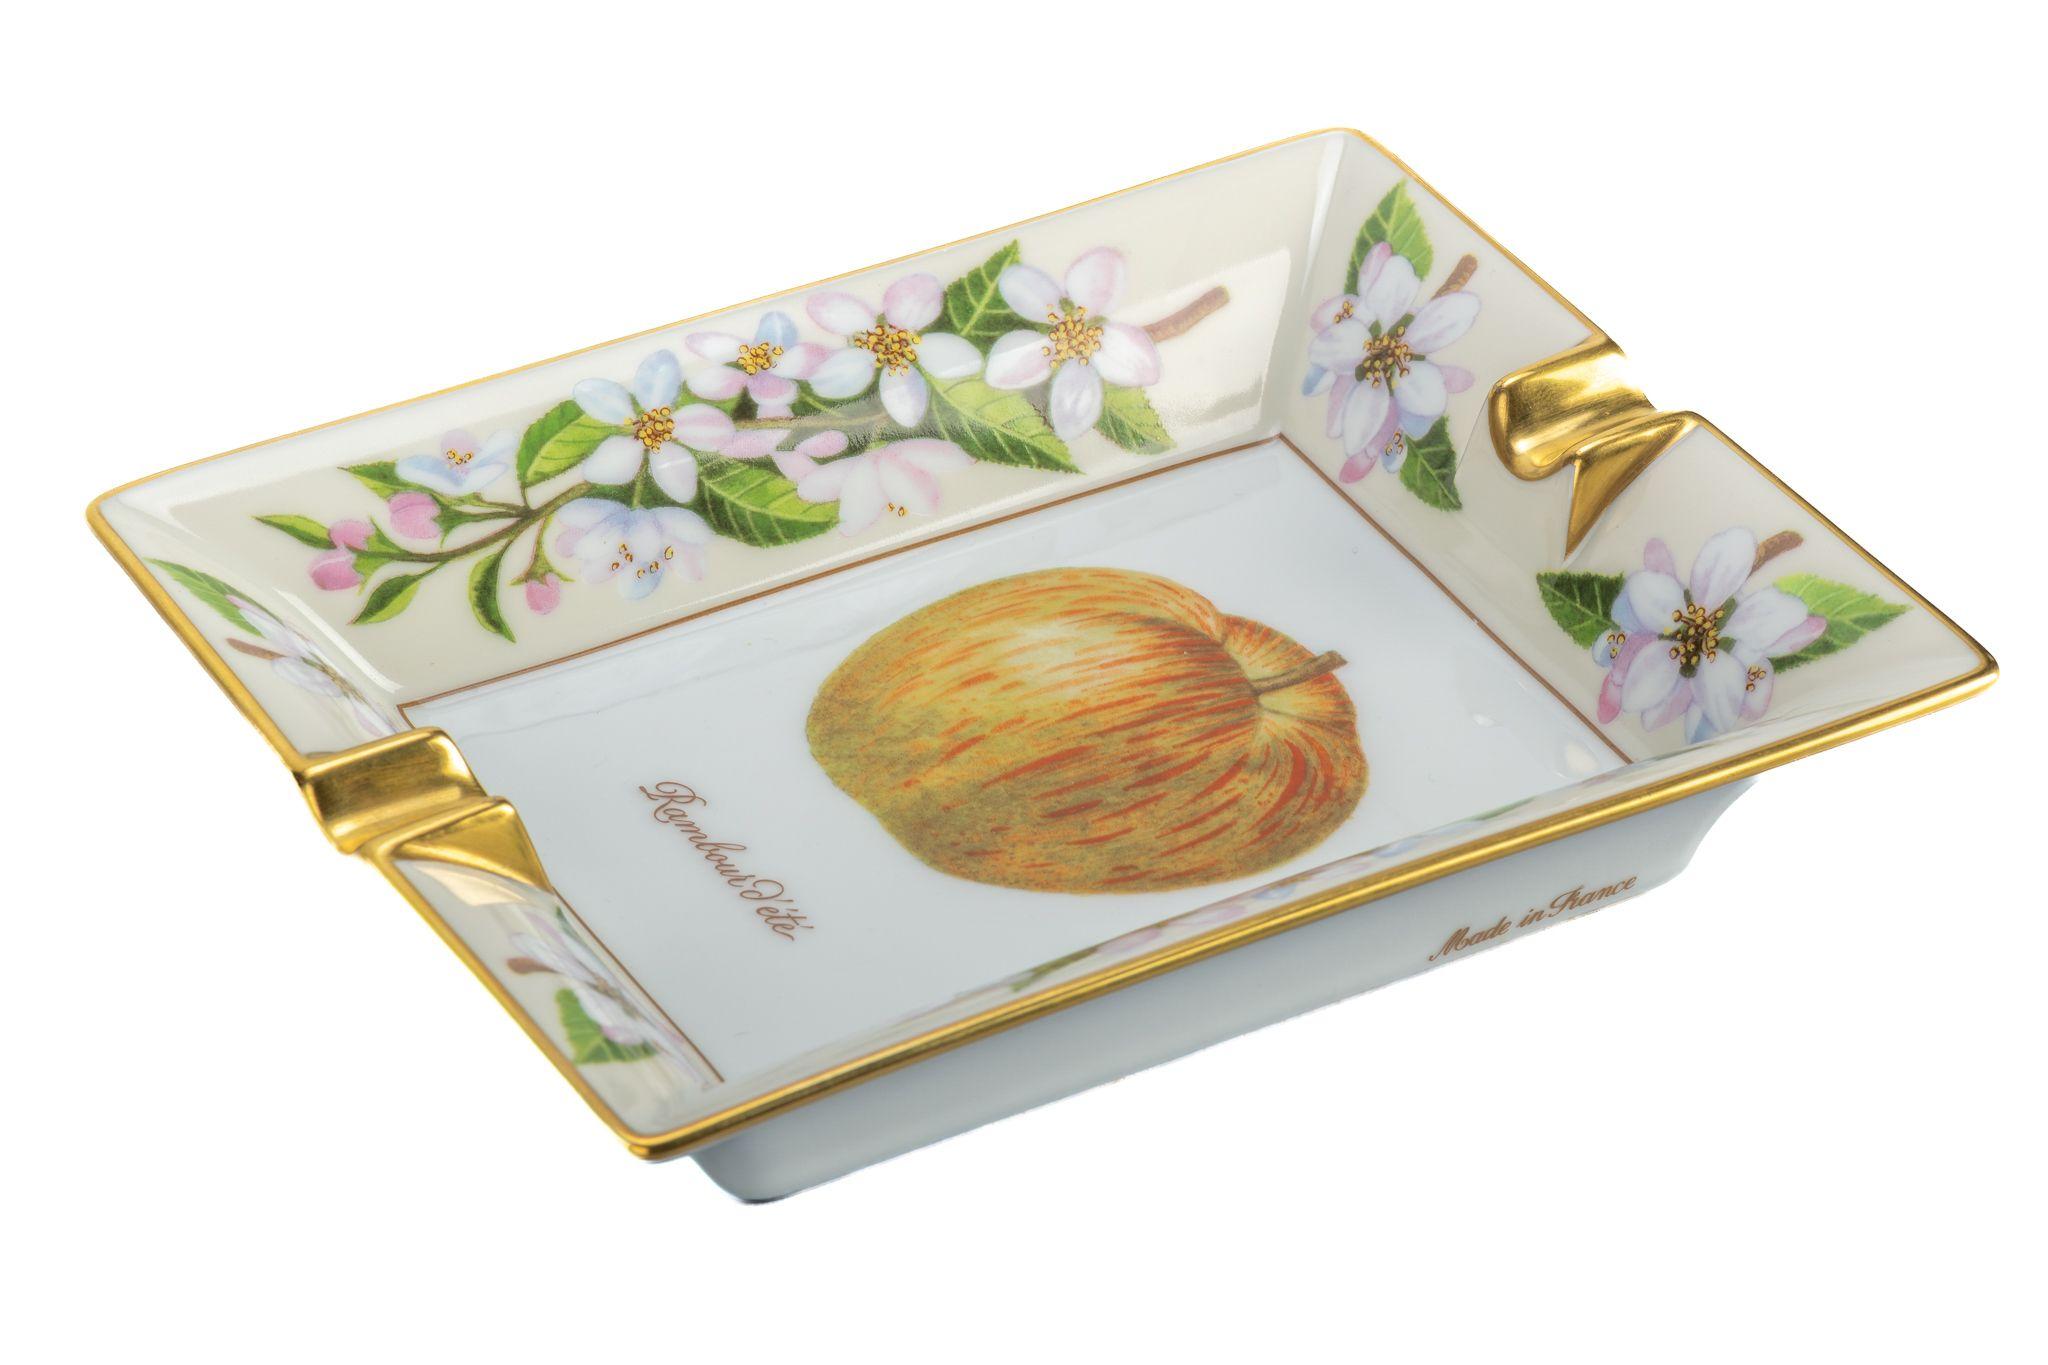 Hermes white, yellow, green and gold porcelain ashtray with a big apple and flowers design.